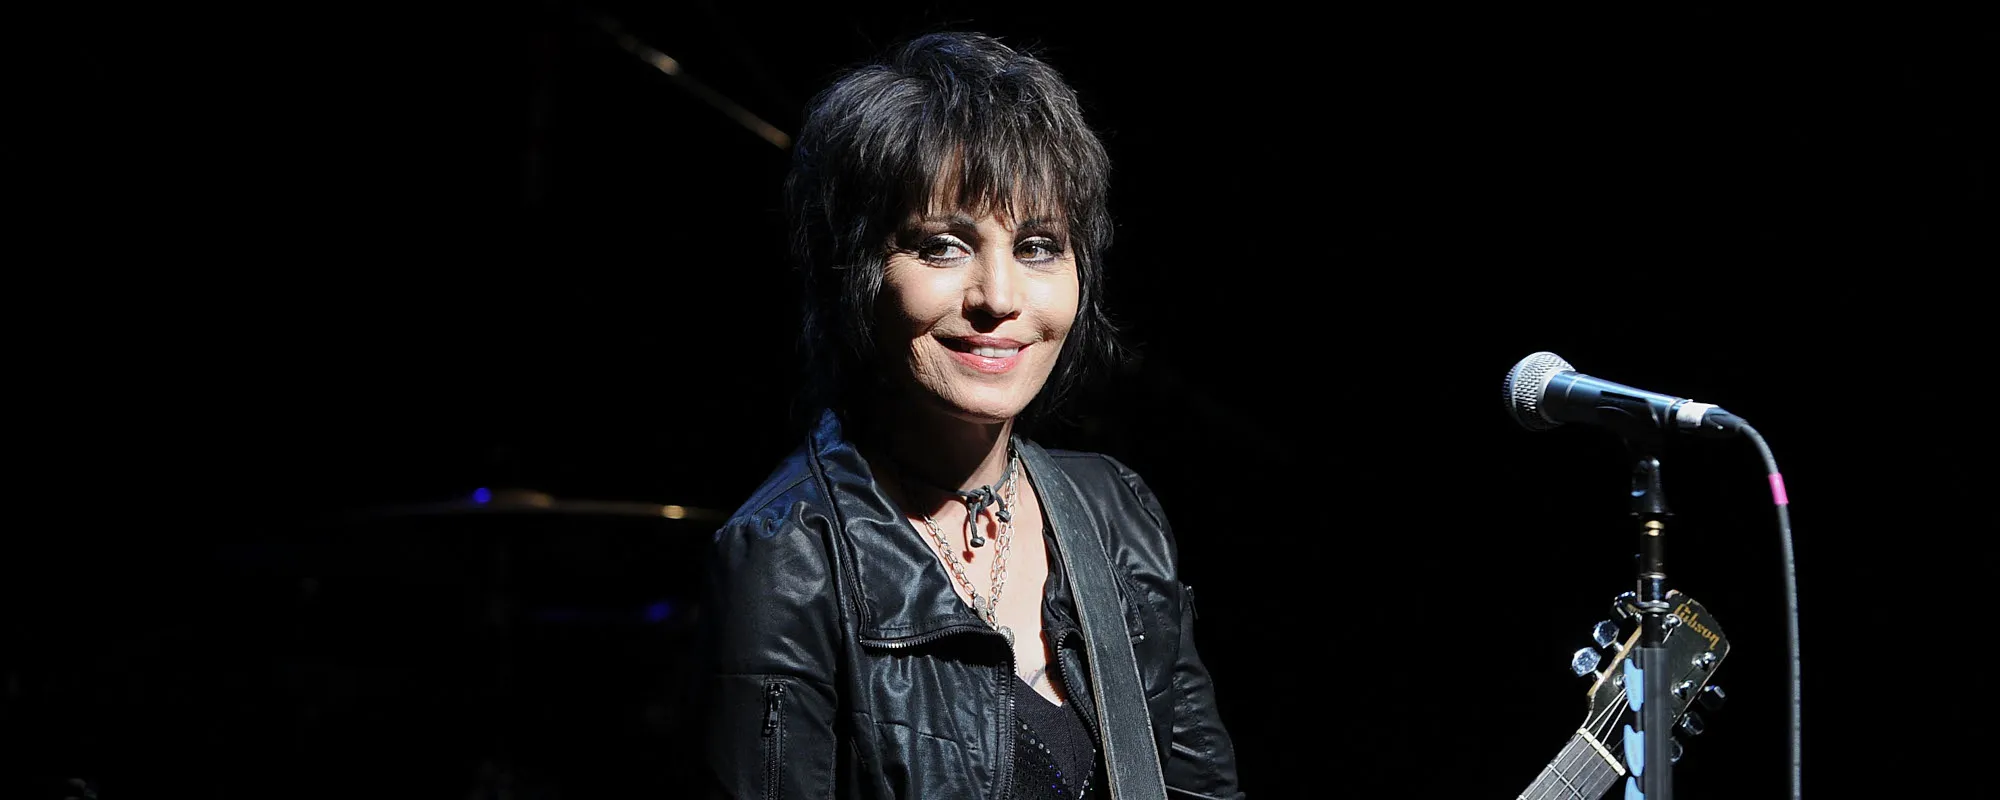 5 Fascinating Facts About Joan Jett